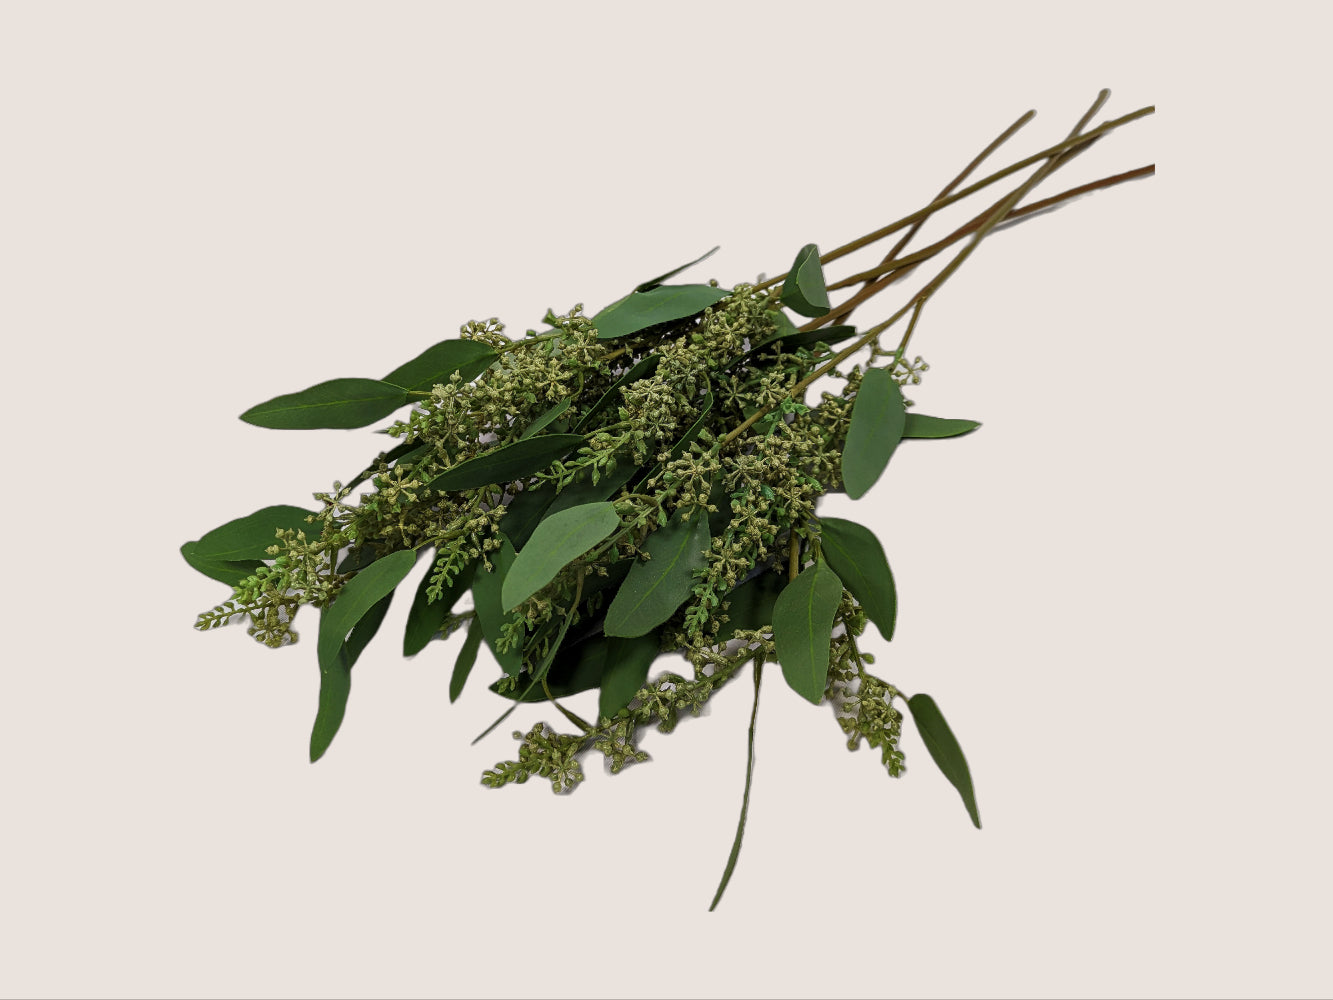 An image of bouquet of five artificial seeded eucalyptus branches against a white background. The branches are 28 inches long and features lifelike sage green leaves with realistic veining and texture. The seeded eucalyptus branch adds natural and organic charm to any floral arrangement or home decor. The image showcases the intricate details and lifelike appearance of the artificial branch, including the color, texture, and shape of the leaves.